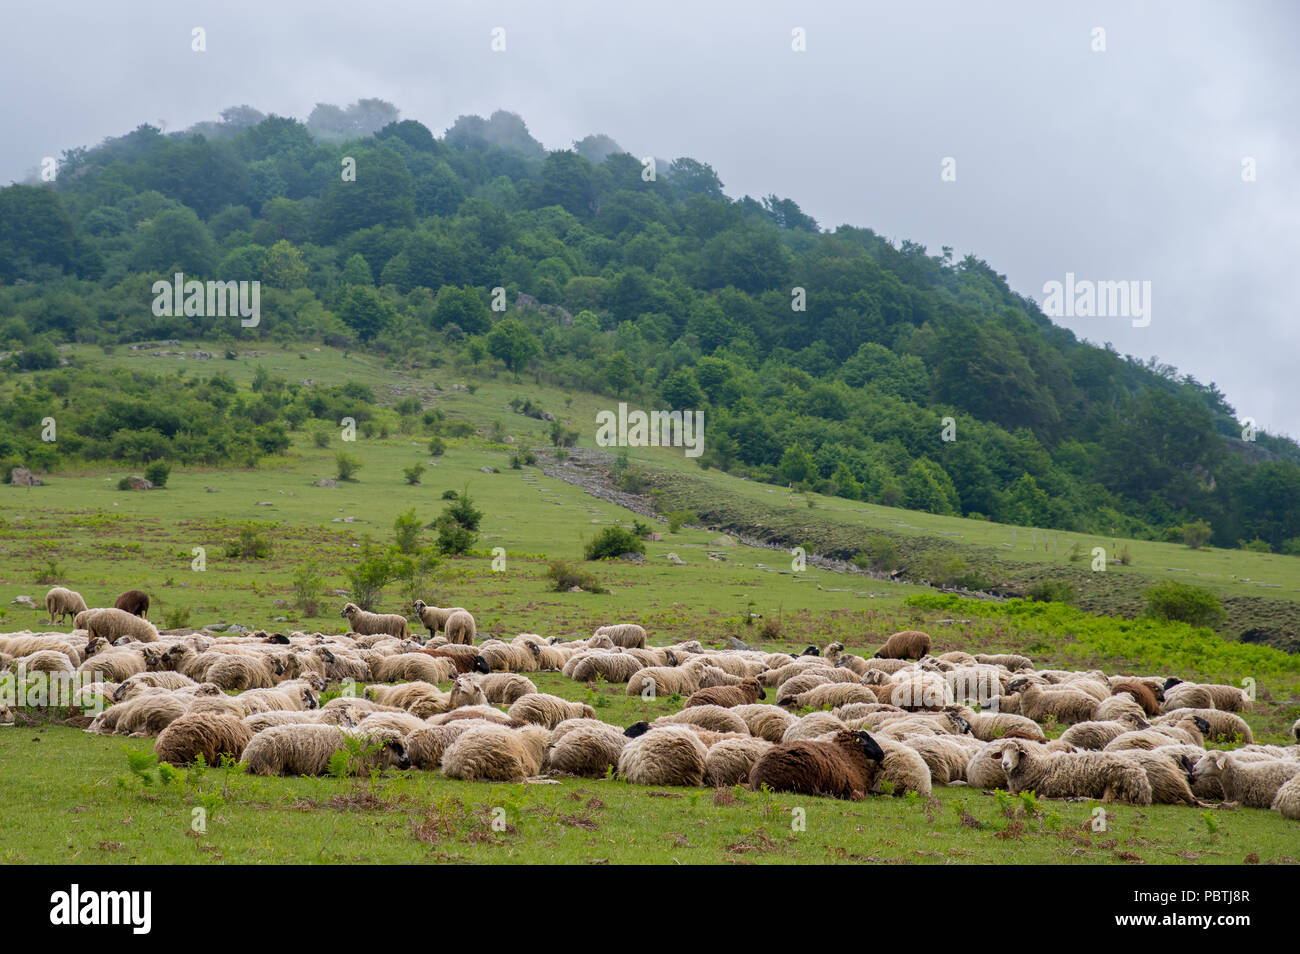 Livestock. Flock of sheep in the mountain. Stock Photo